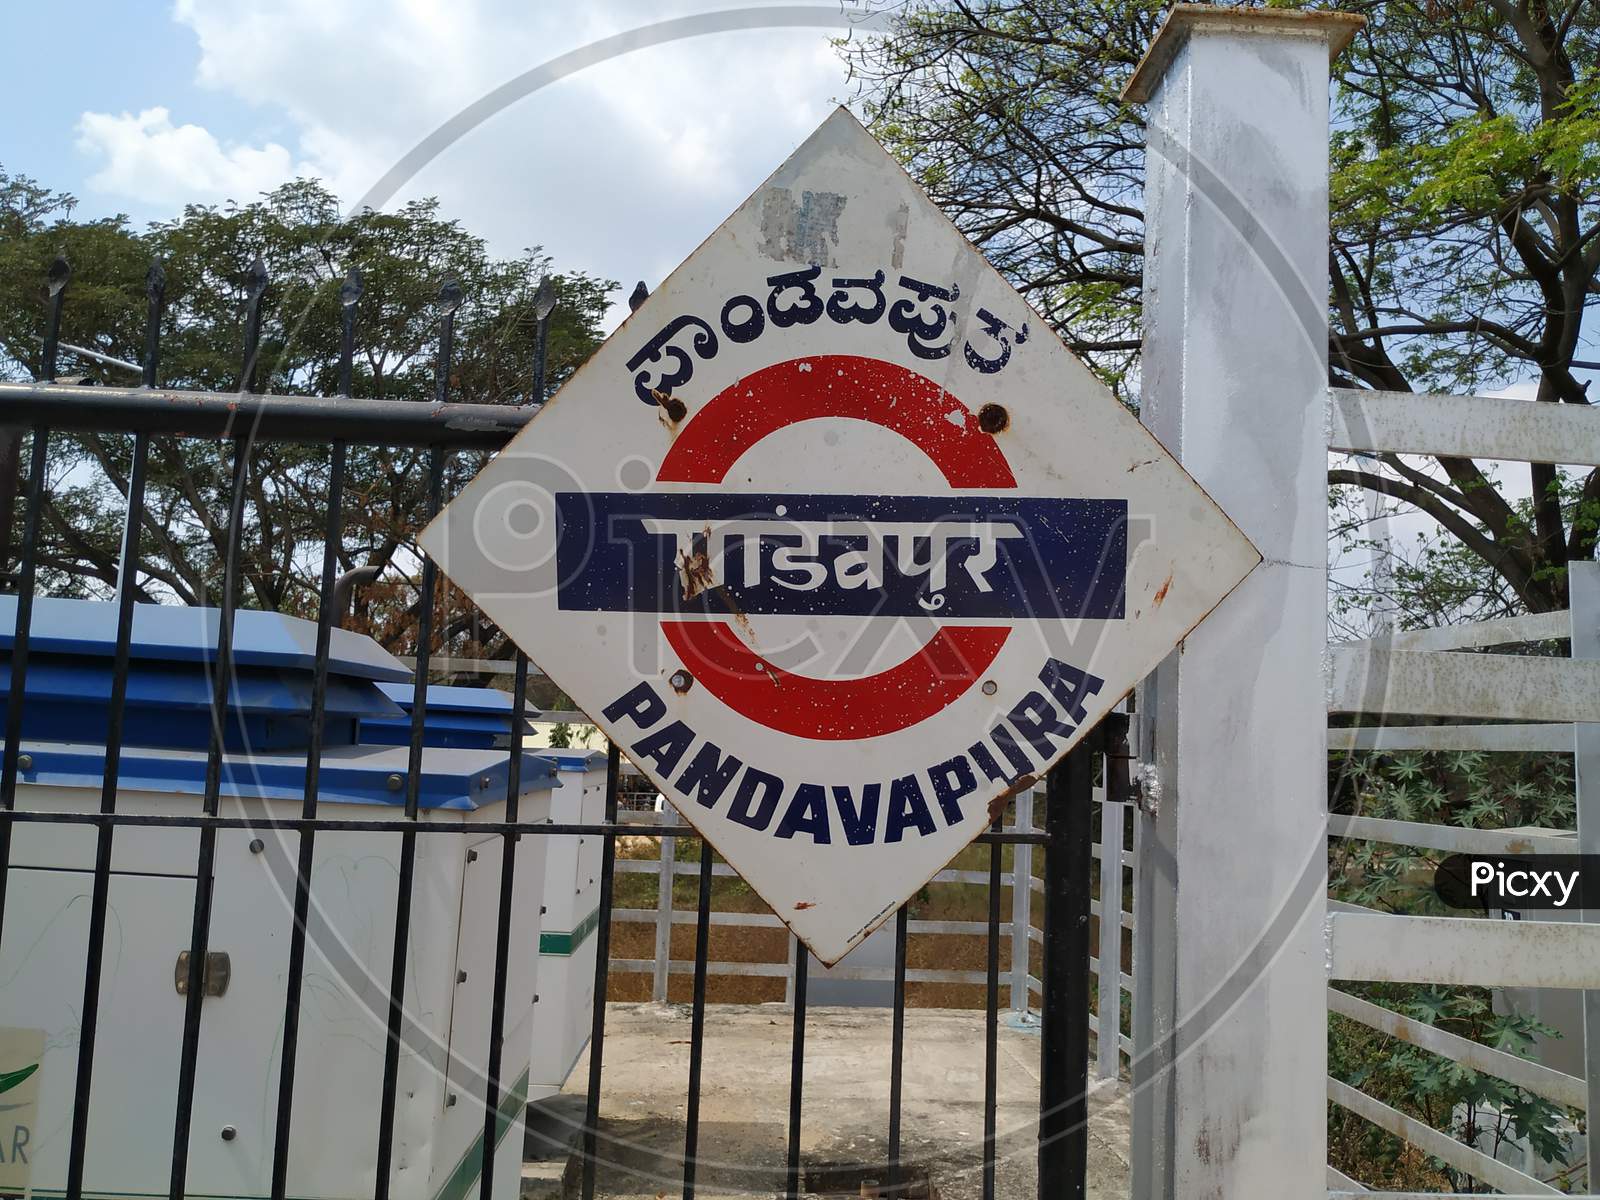 Location Name Board Of Pandavapura, In A Railway Station In A Diamond Shape With Red And Blue Color.